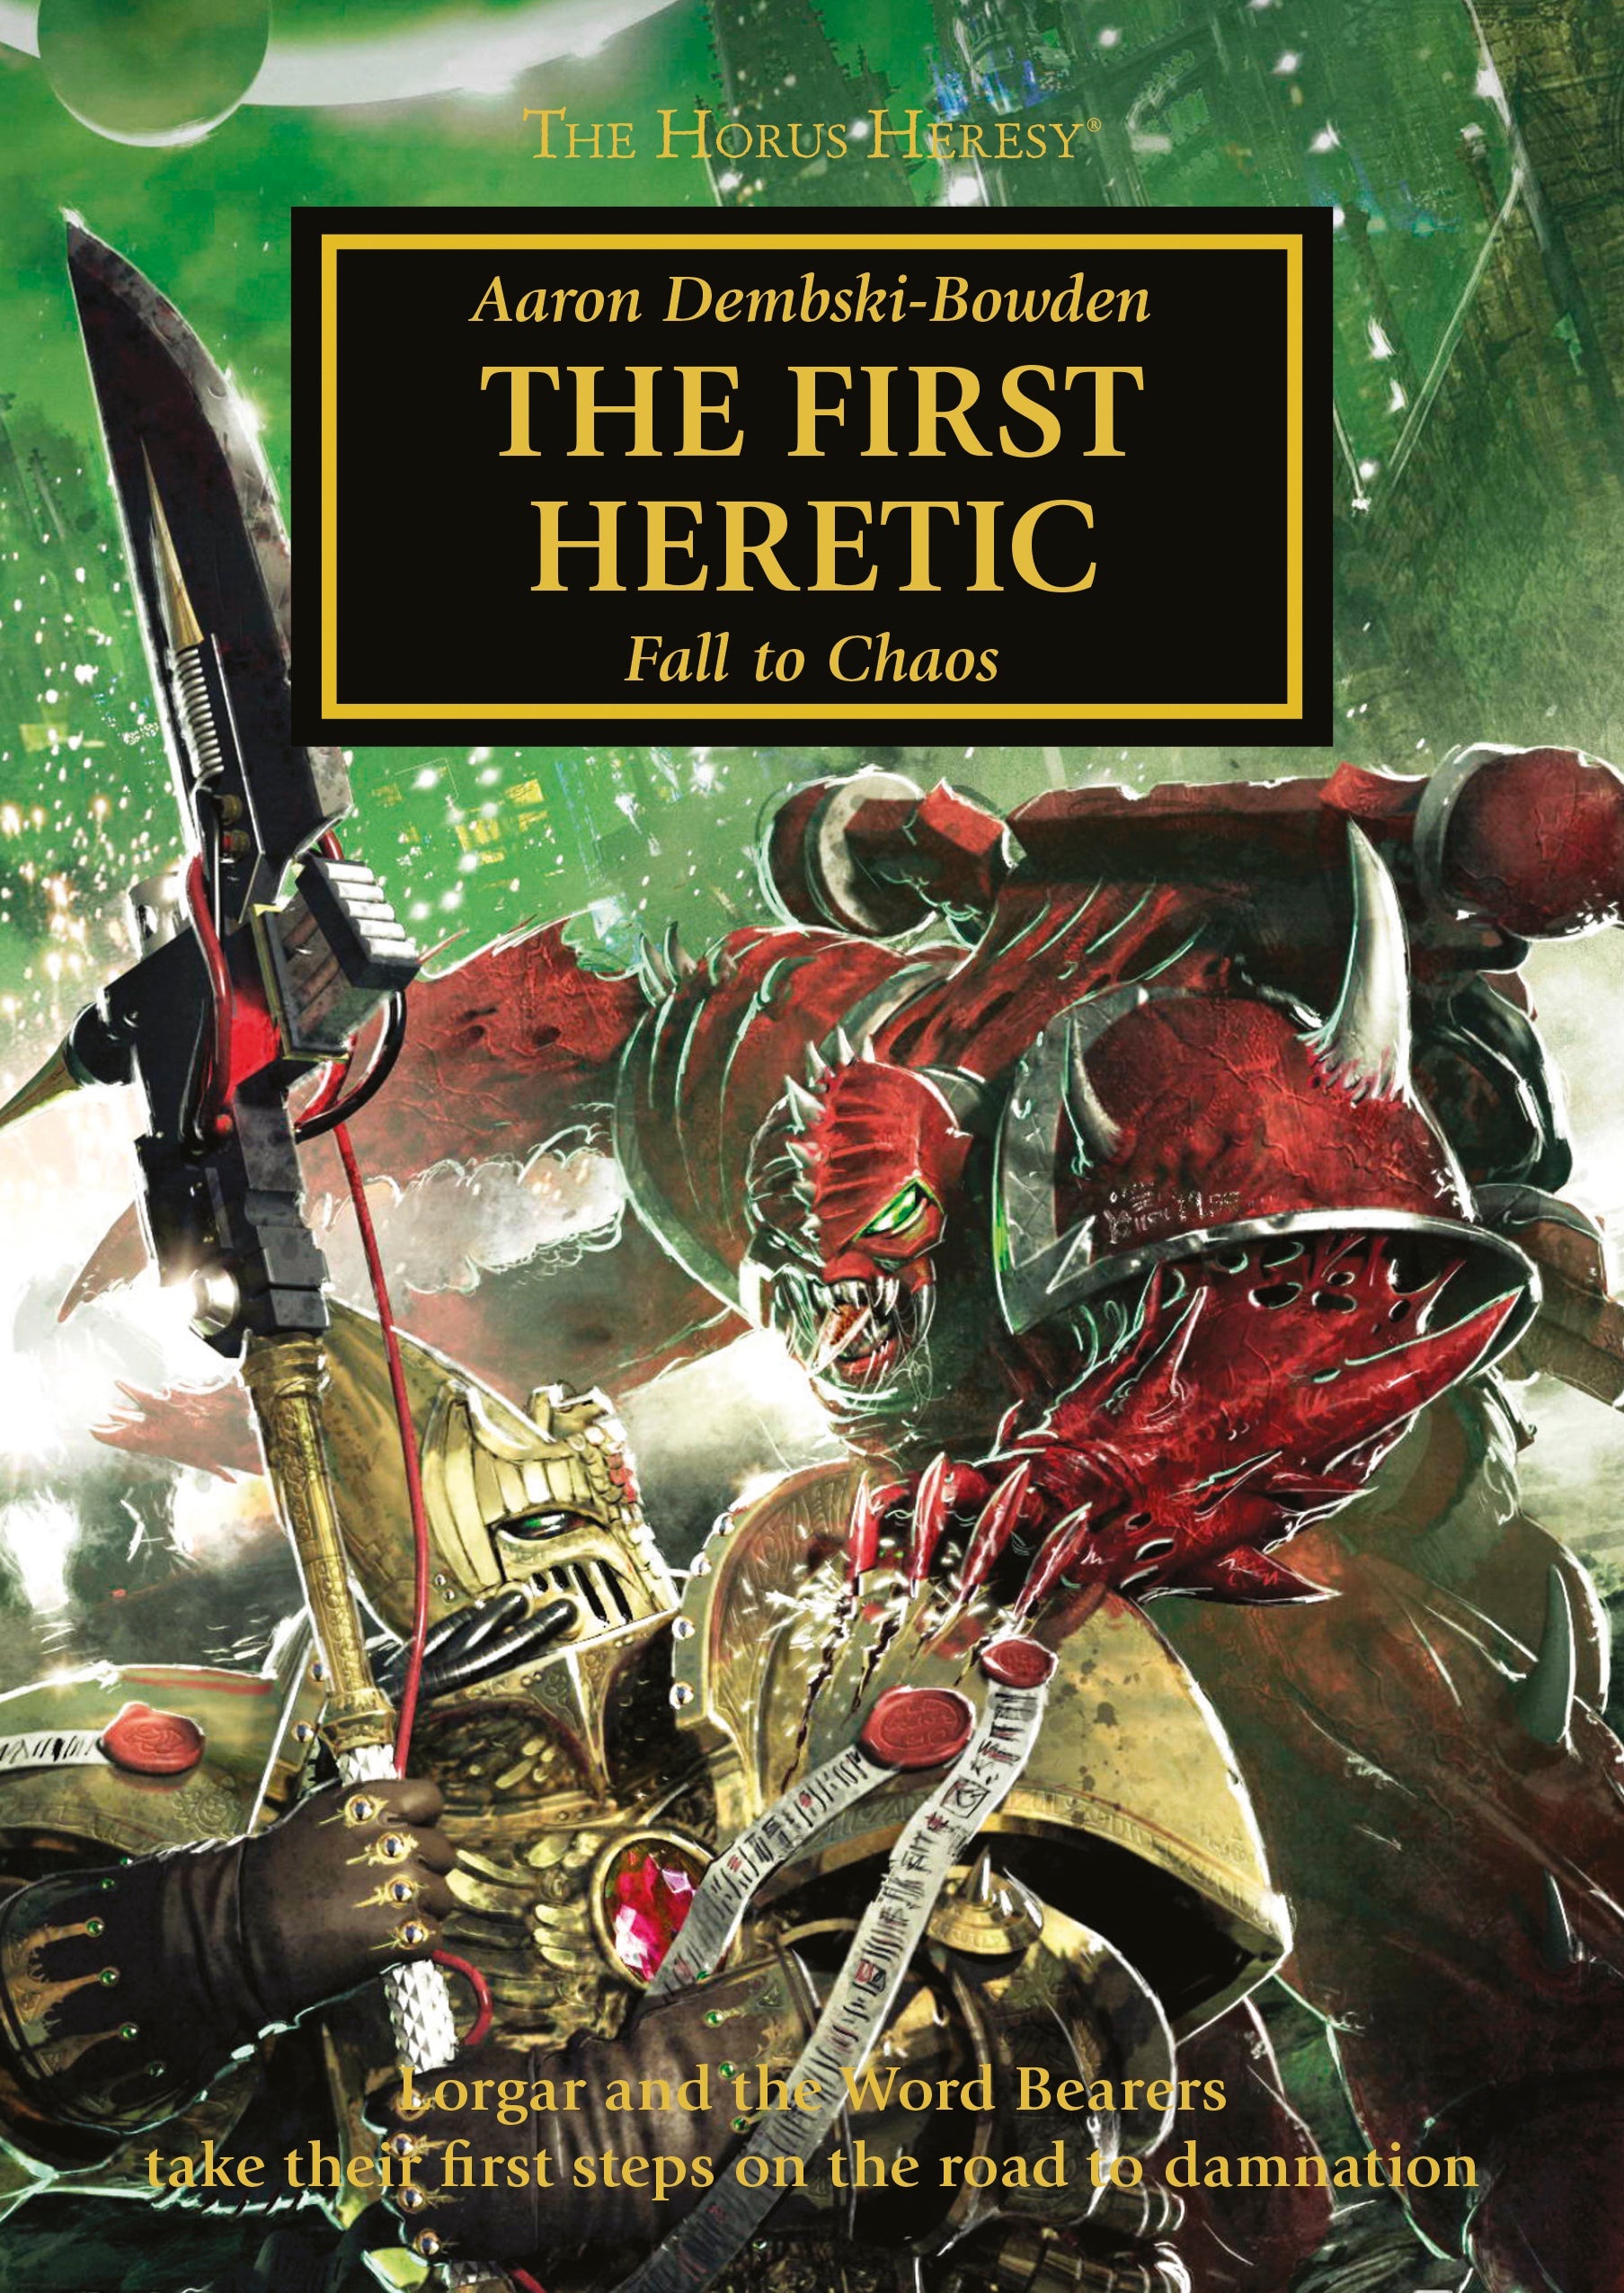 The Horus Heresy Book 14: The First Heretic (PB)